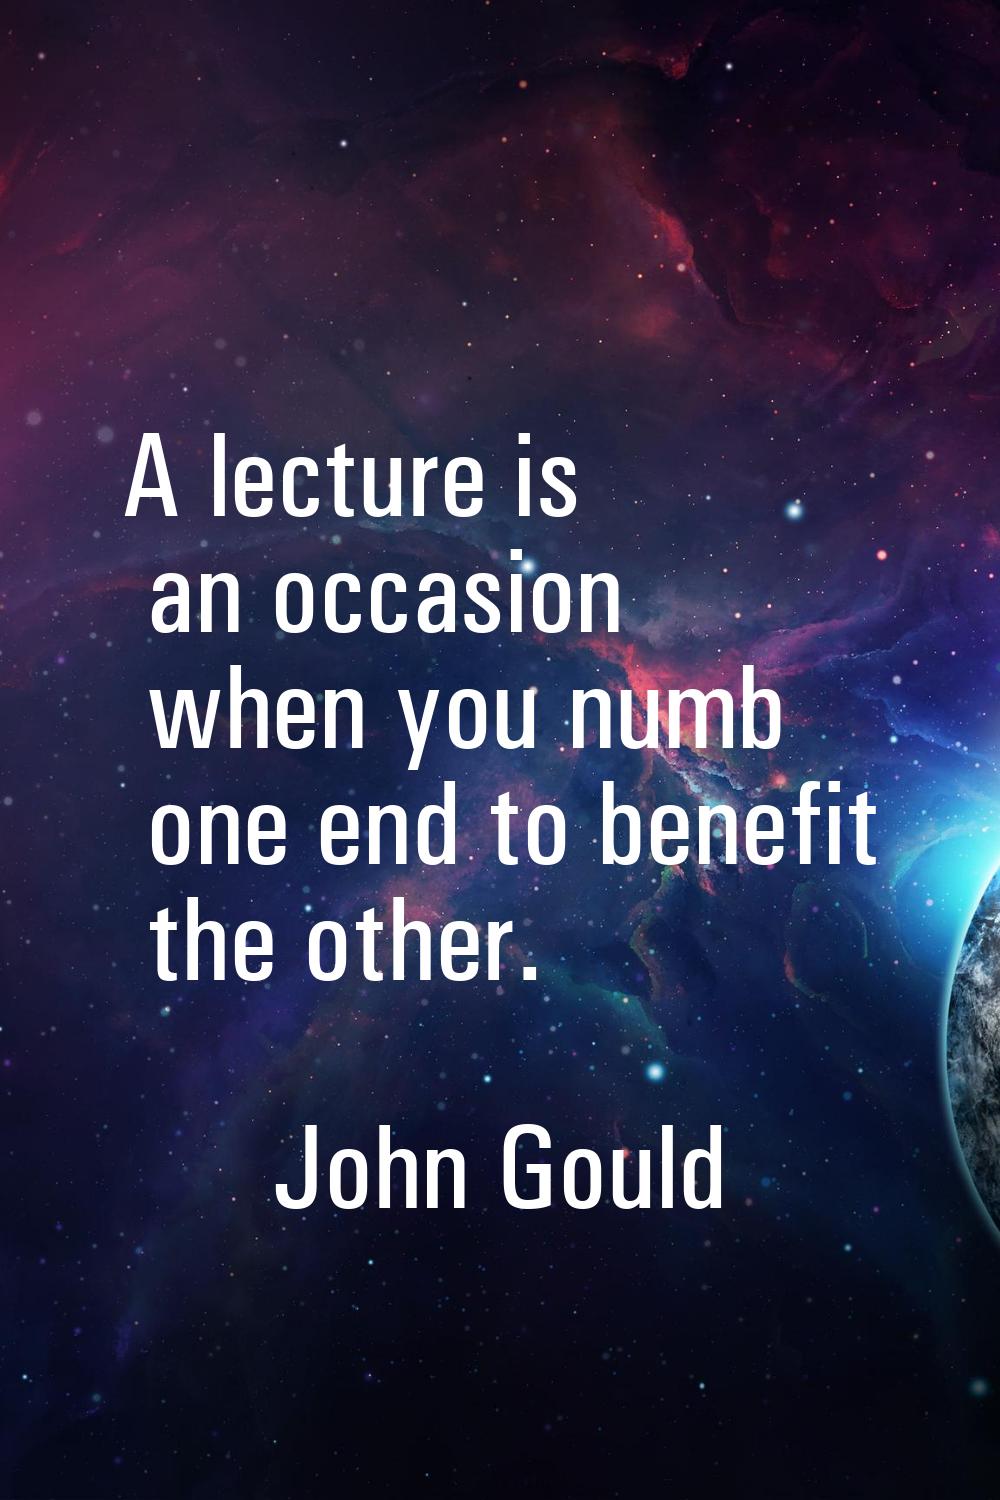 A lecture is an occasion when you numb one end to benefit the other.